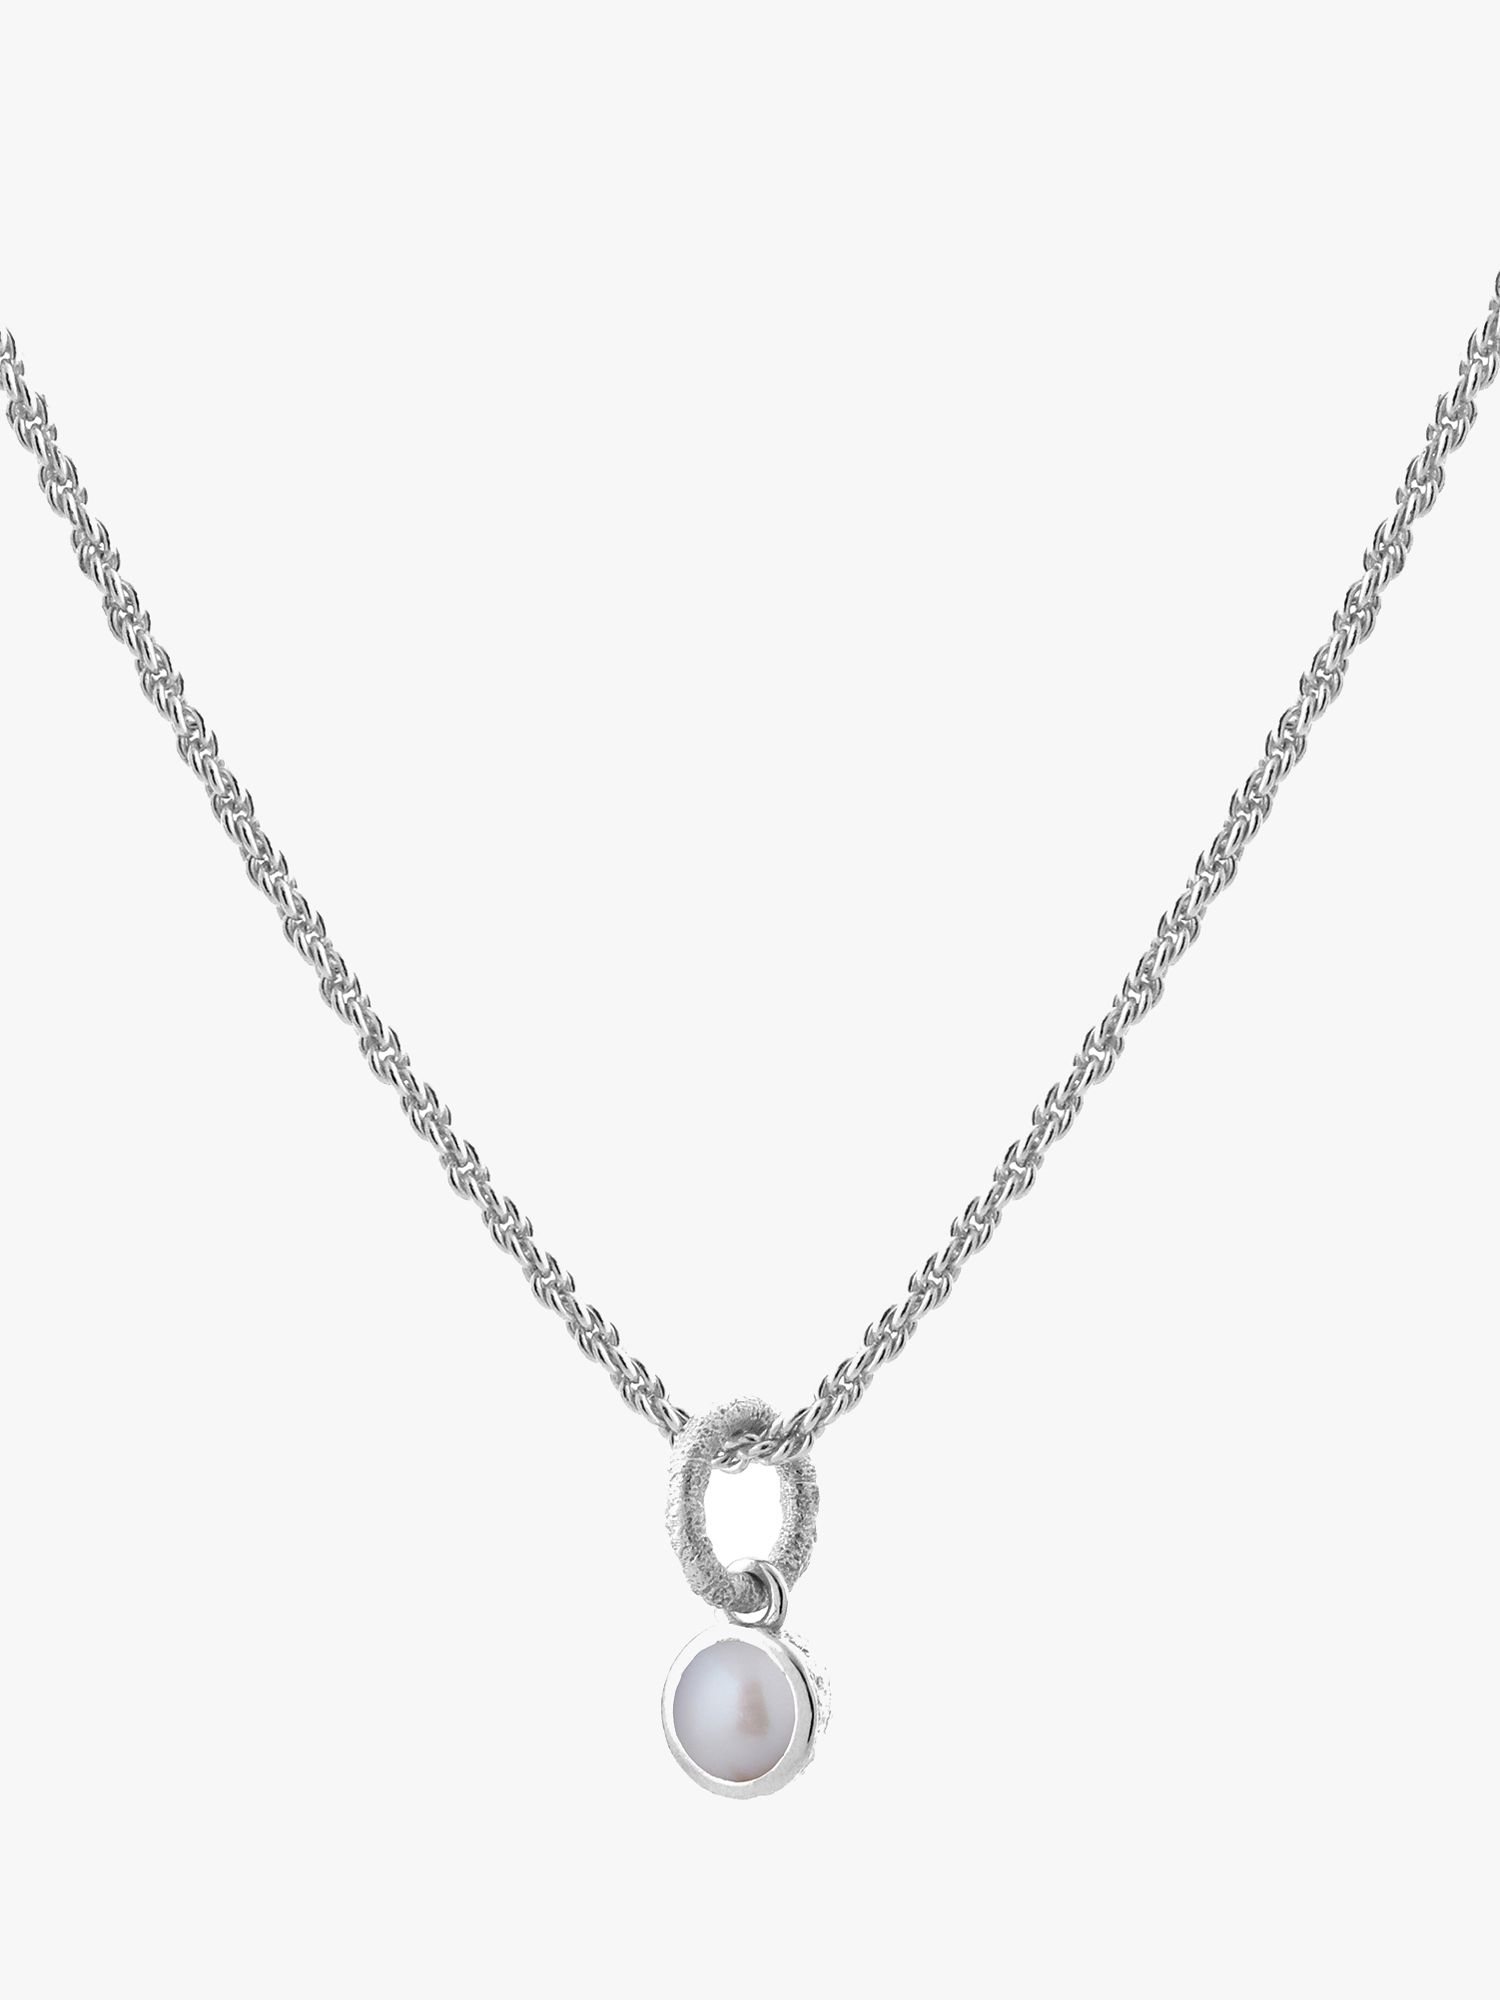 Tutti & Co June Birthstone Necklace, Pearl, Silver at John Lewis & Partners